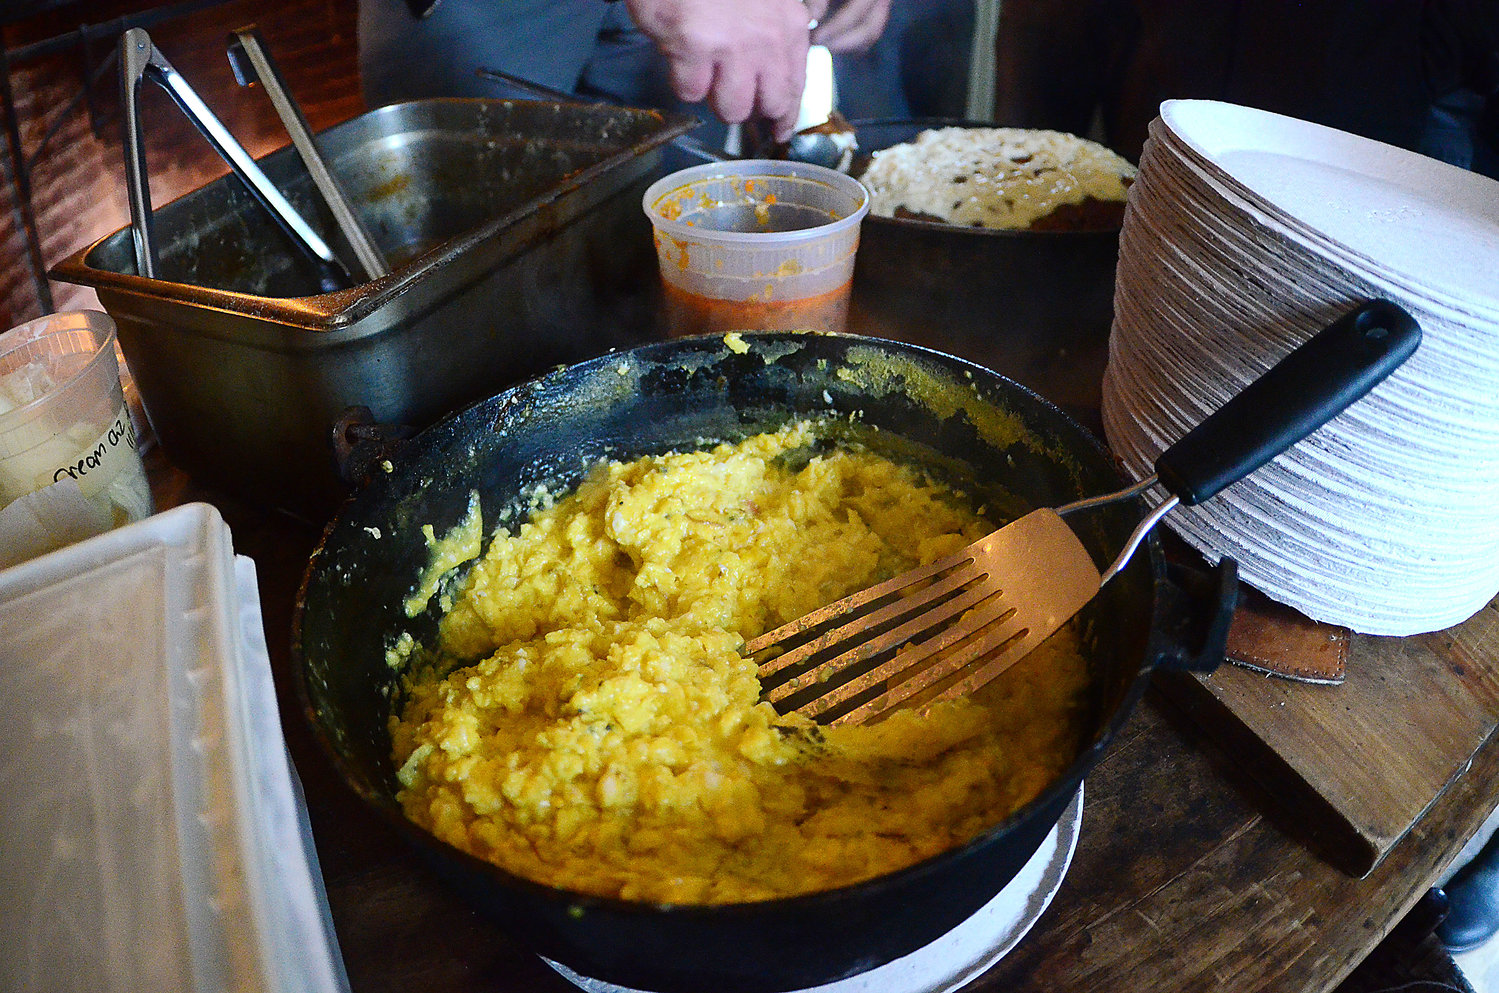 An egg dish prepared by restaurant owner Ben Sukle on an historic open hearth for his Birch and Oberlin employees at Coggeshall Farm on Tuesday.